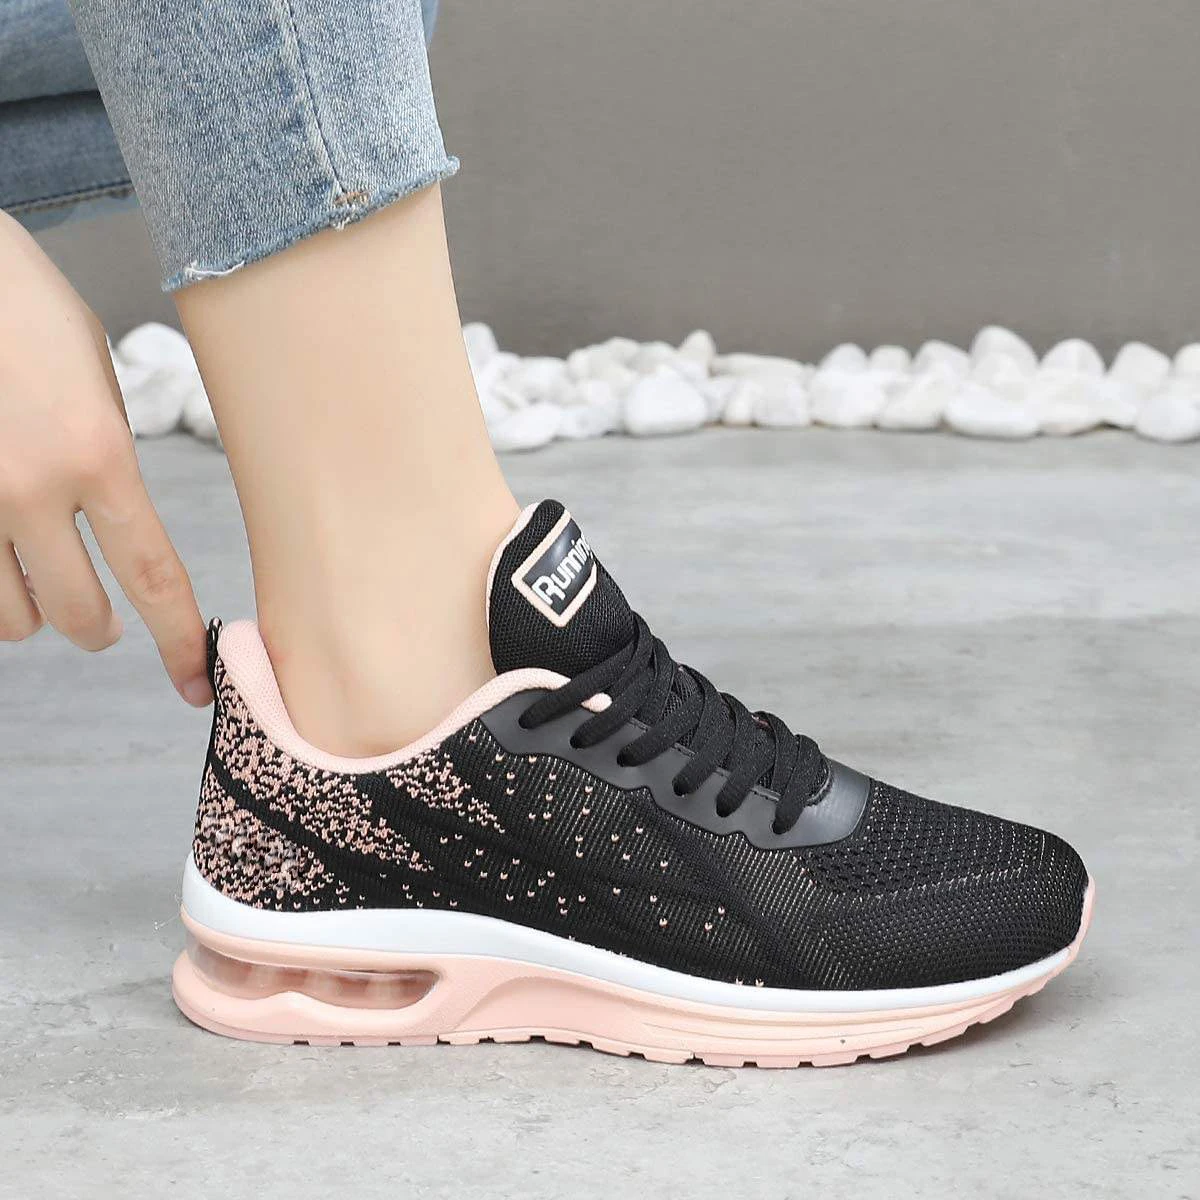 2022 Fashion Design Women Athletic Running Shoes Sport Gym Jogging Tennis Fitness Sneaker